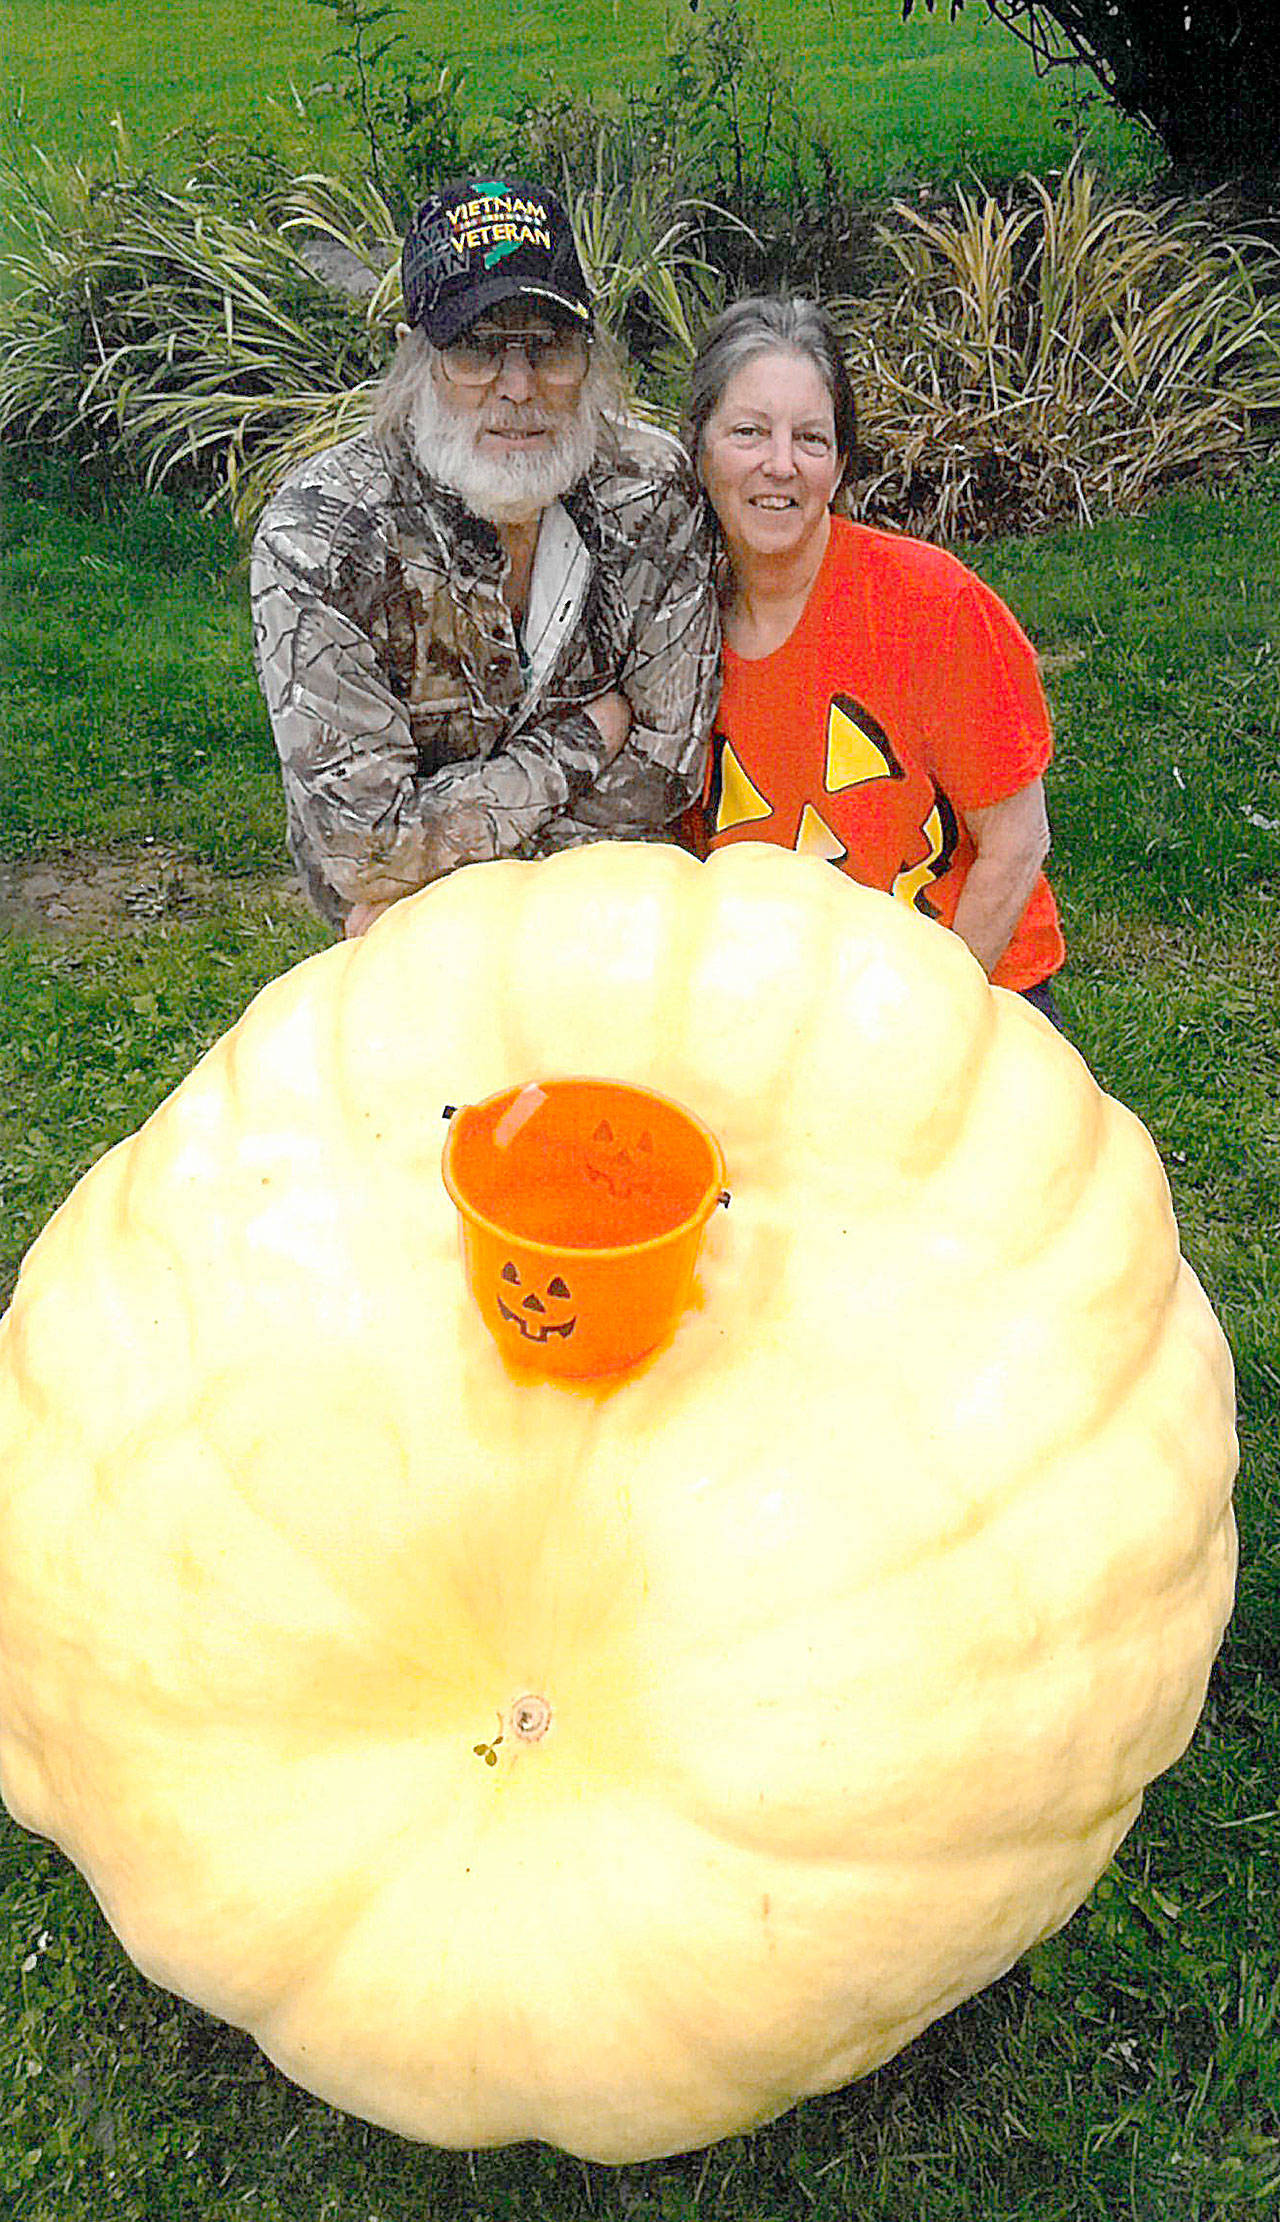 PHOTO COURTESY AMY FOWLER                                Vietnam veteran and retired millwright Larry Smith, here with his wife Michelle, shows off a 580-pound pumpkin he grew in his garden up the Wishkah. Smith’s stepdaughter, Amy Fowler, said Smith was challenged when his great-grandson was born 8 years ago to grow a pumpkin each year large enough for the child to fit in. The pumpkin is on display in front of Fowler’s home on Coolidge Road in South Aberdeen.